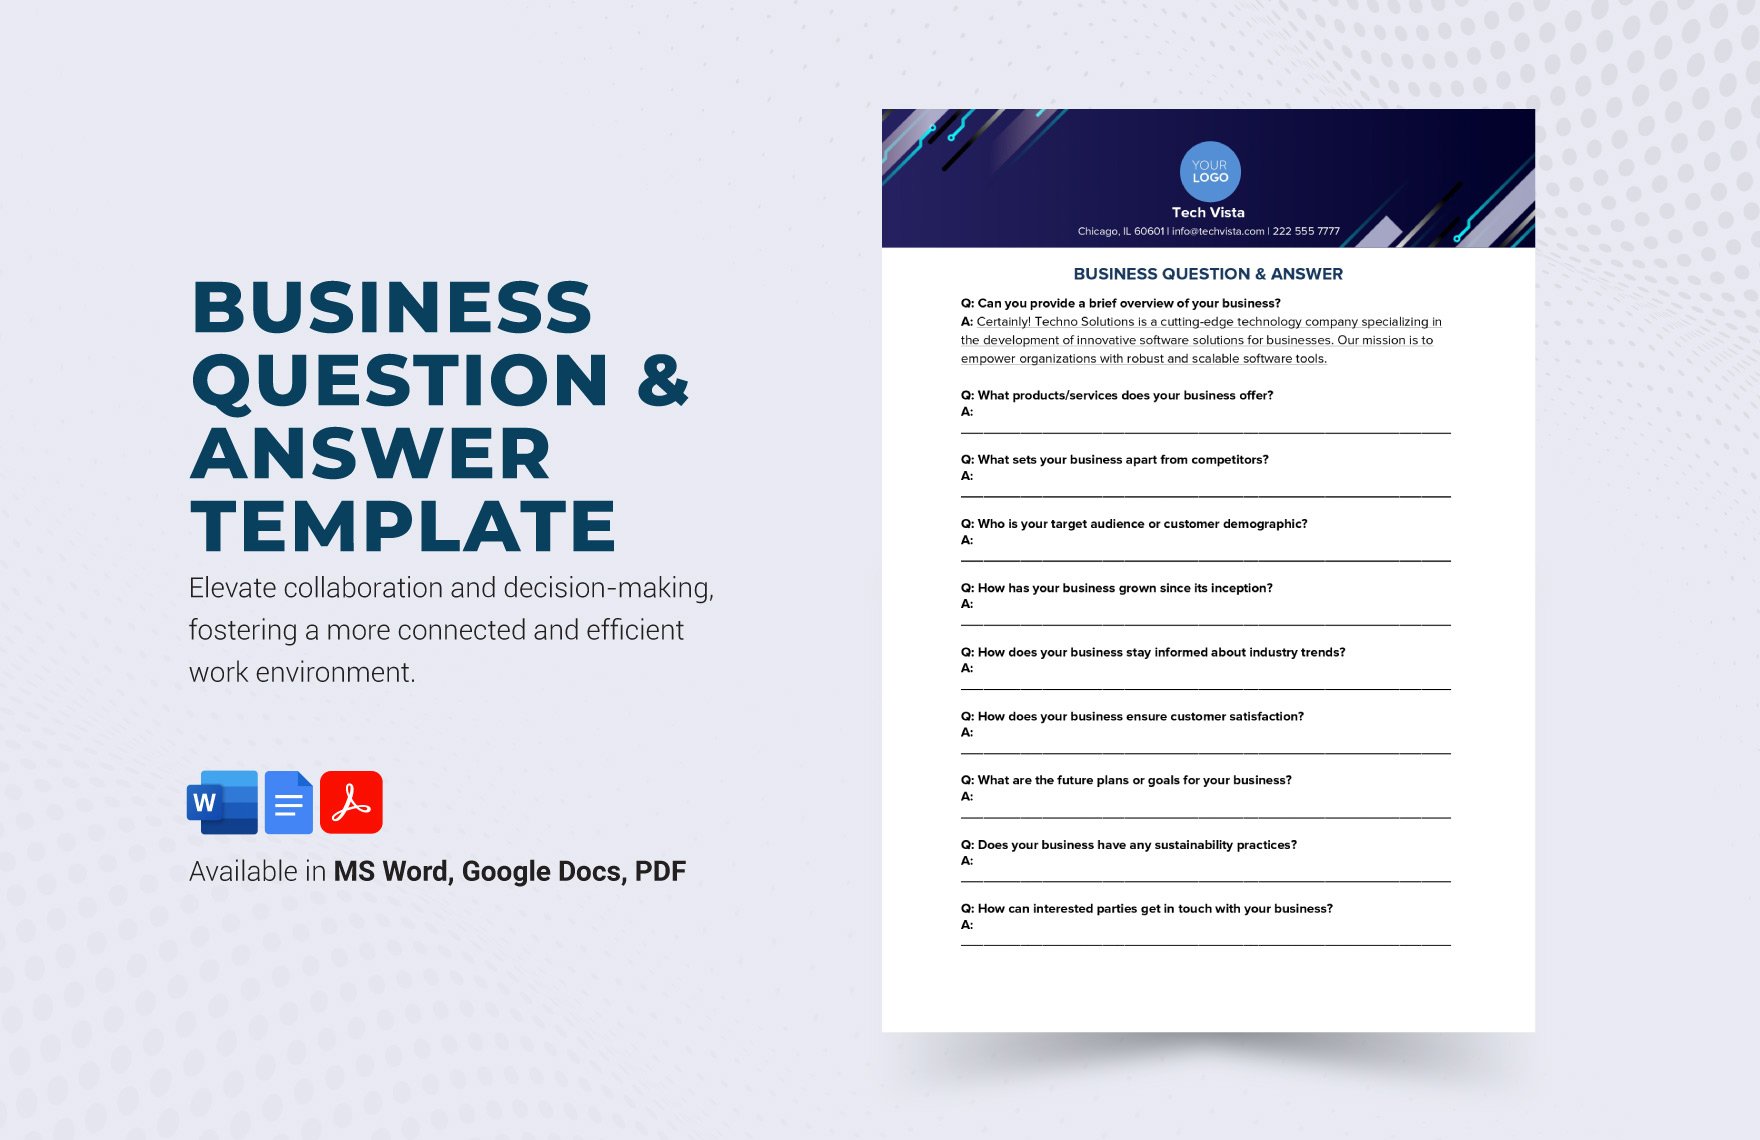 Business Question & Answer Template